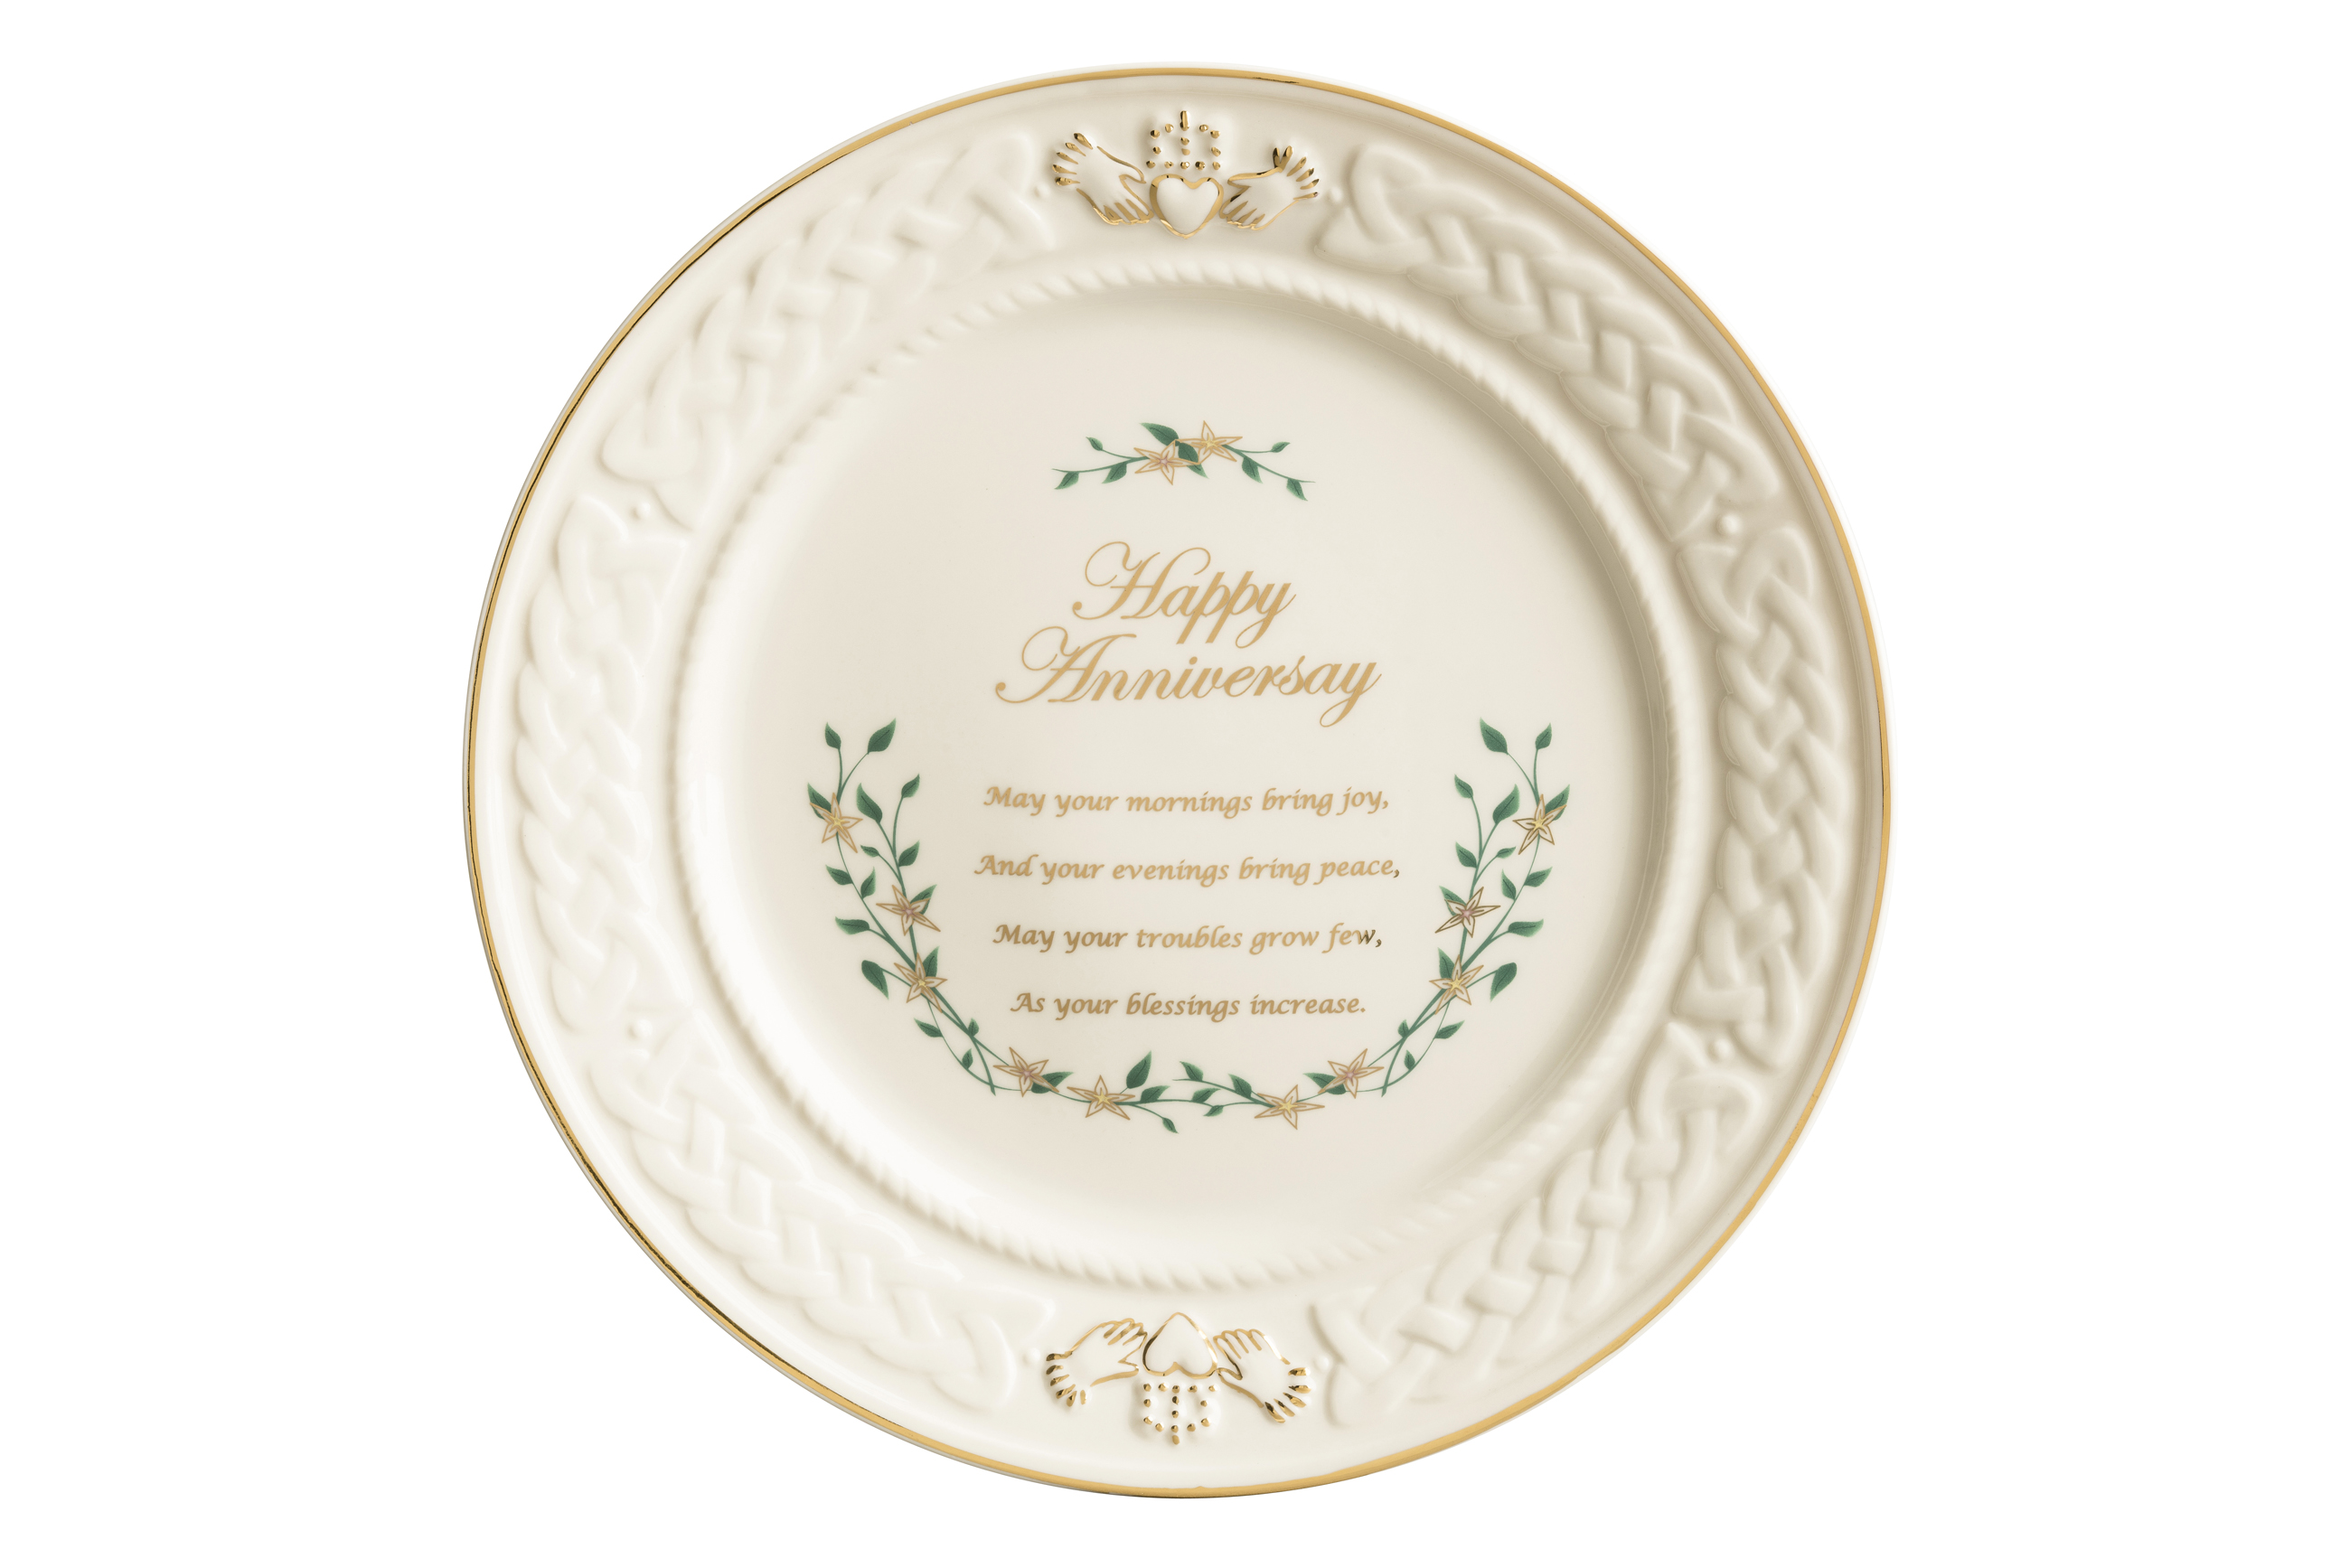 Product image for Belleek Happy Anniversary Plate